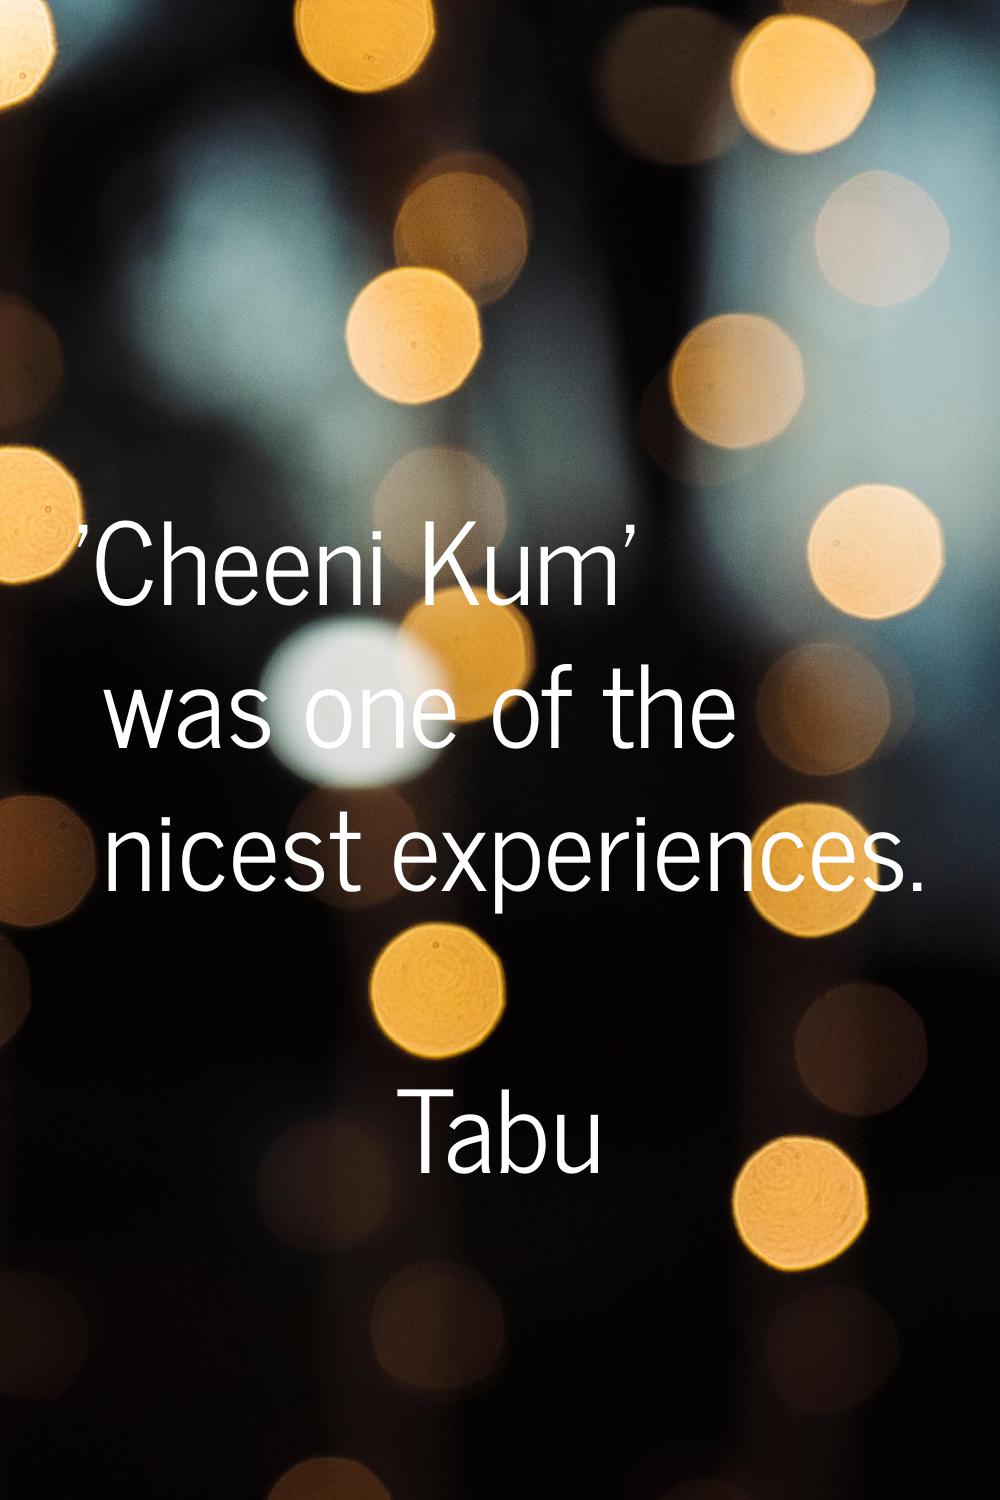 'Cheeni Kum' was one of the nicest experiences.